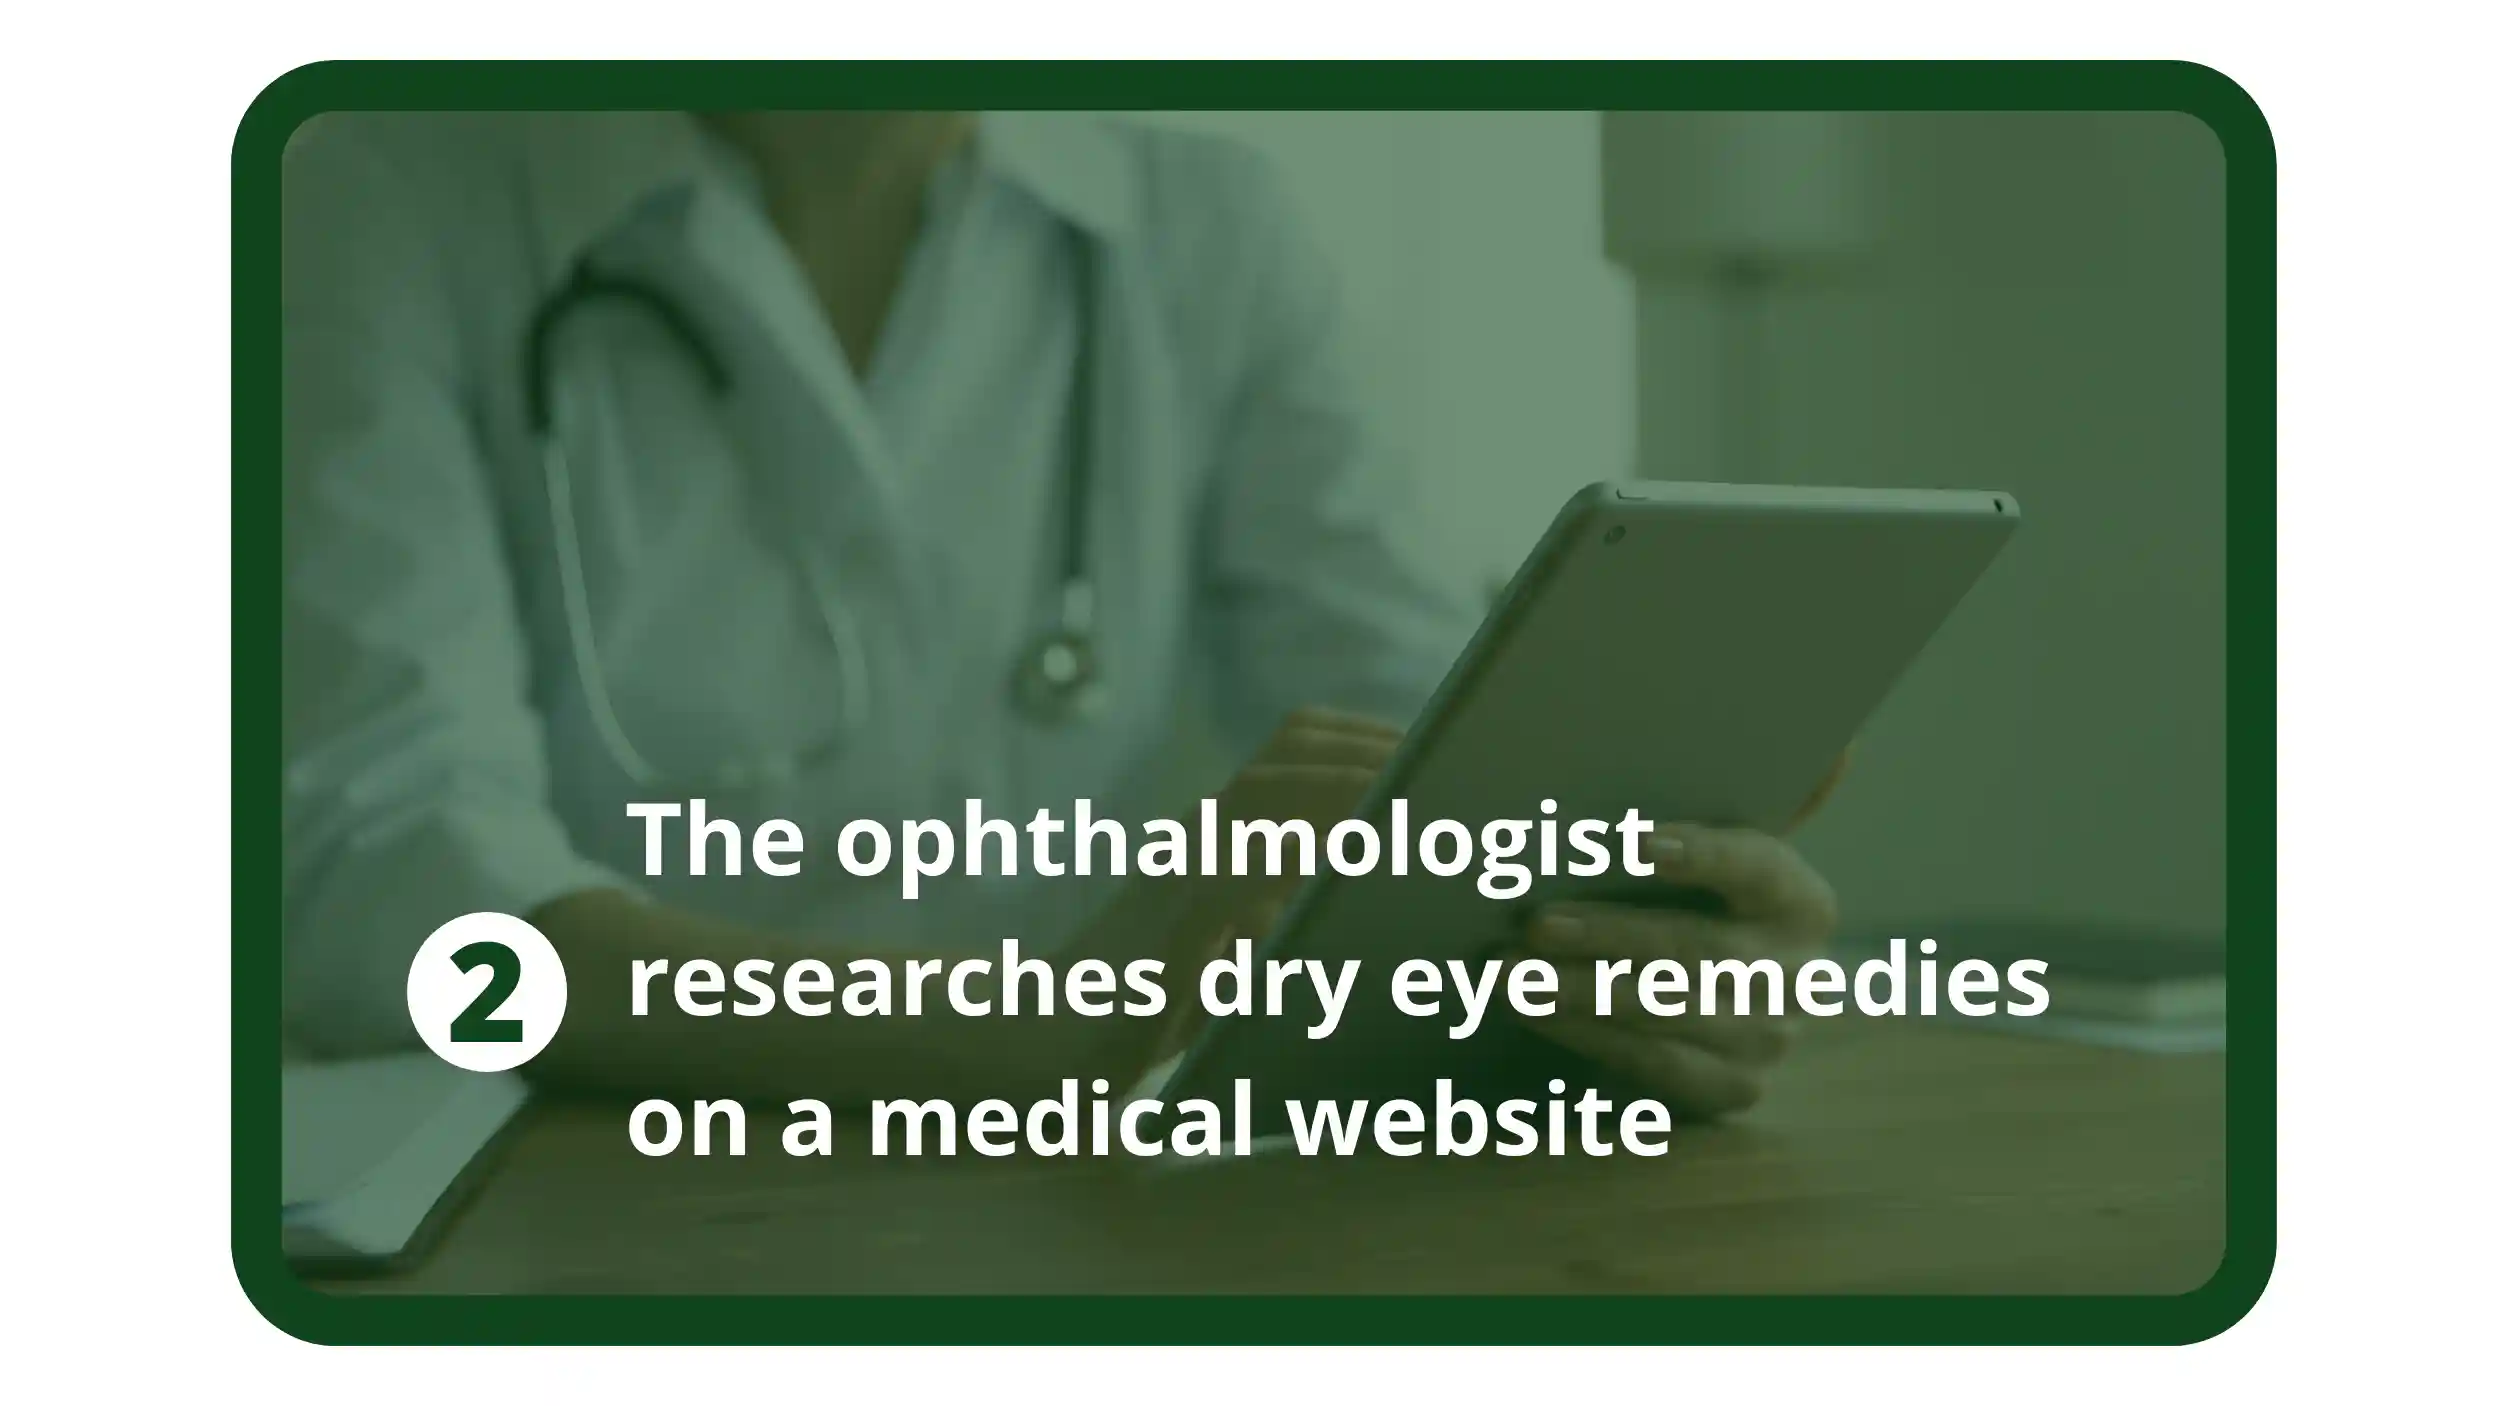 The ophthalmologist researches dry eye remedies on a medical website